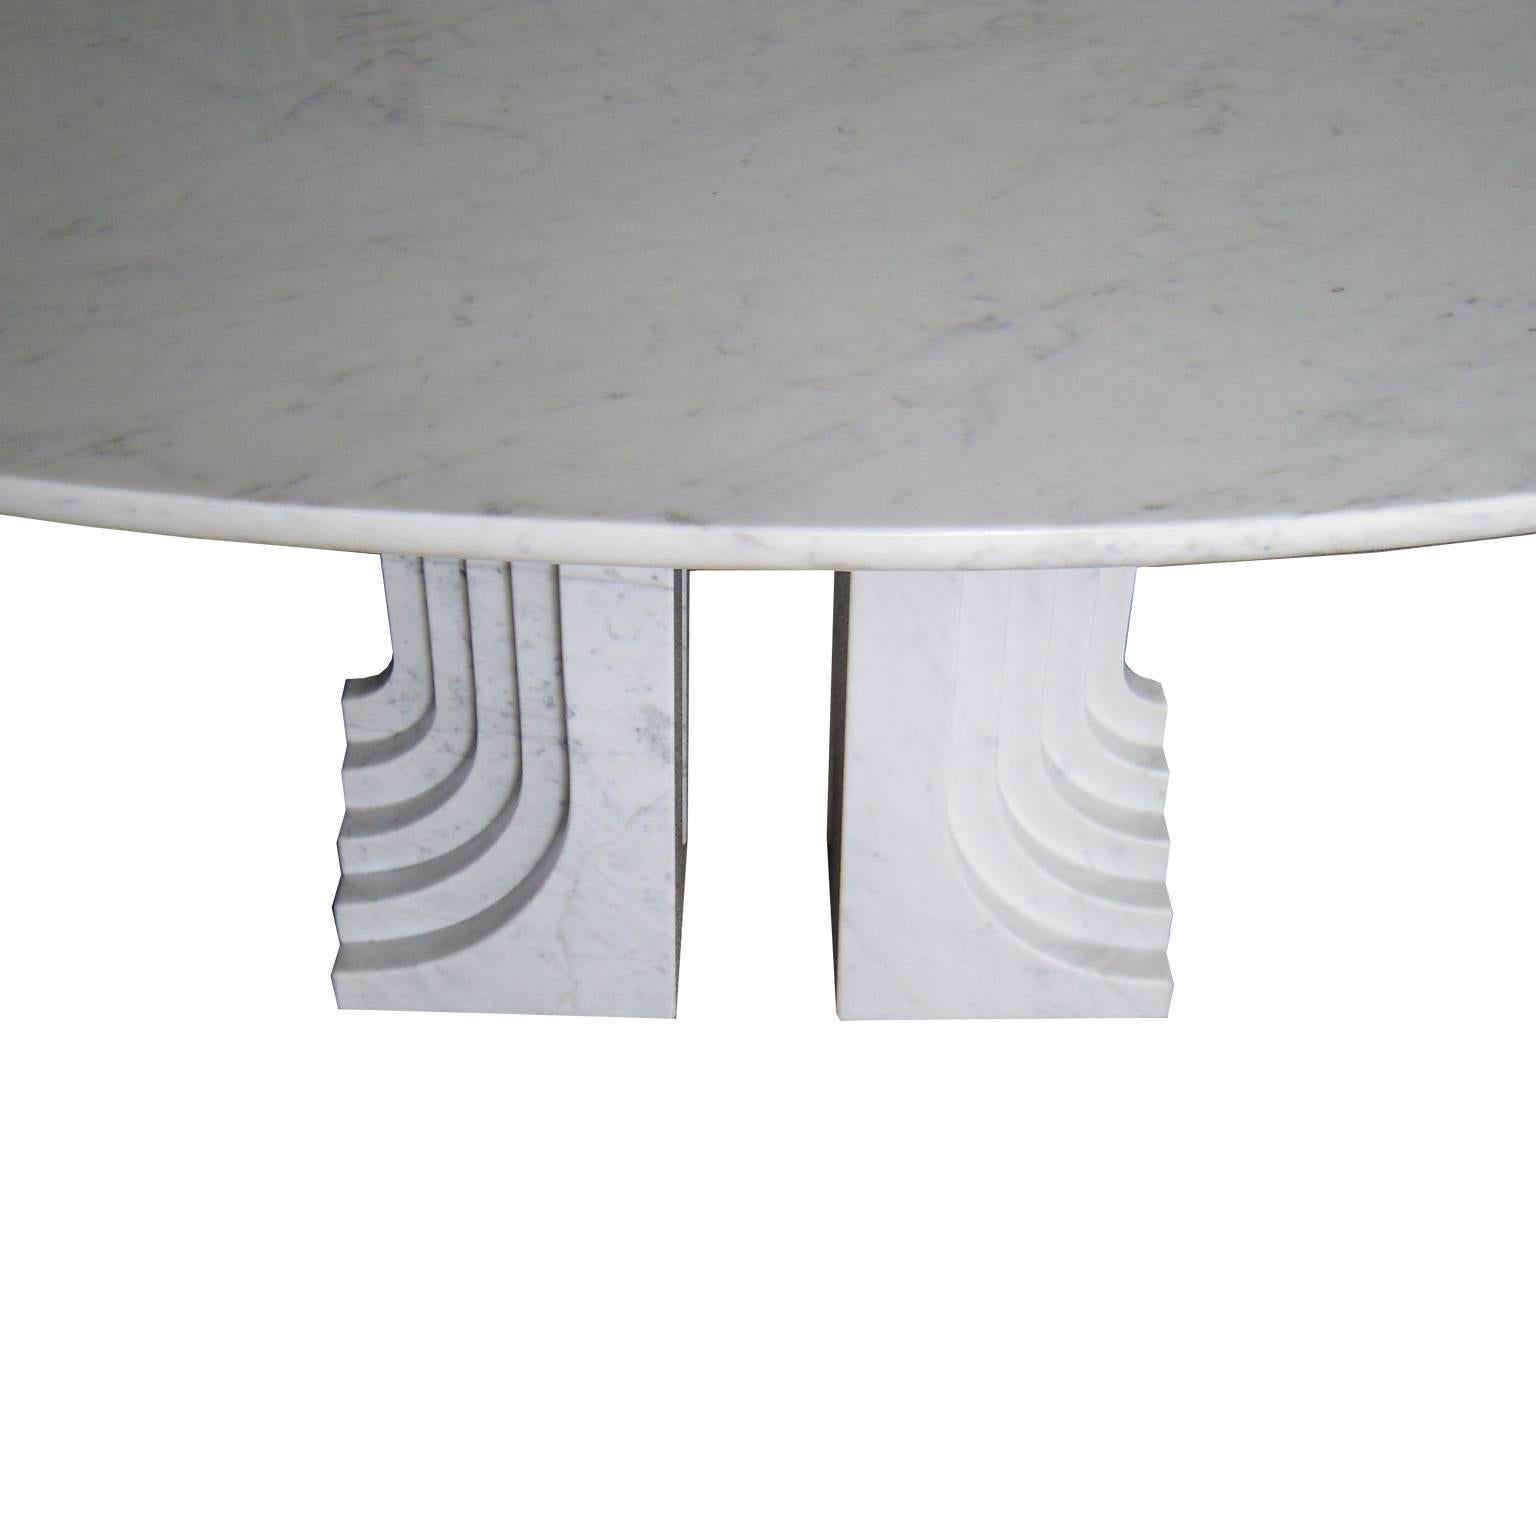 SAMO is an wide, amazing dining table designed by Carlo Scarpa for Dino Gavina Simon spa. This table consists in a single solid block base and a oval extra-thick marble top. The marble used is carrara white marble (finish over the top and the base,